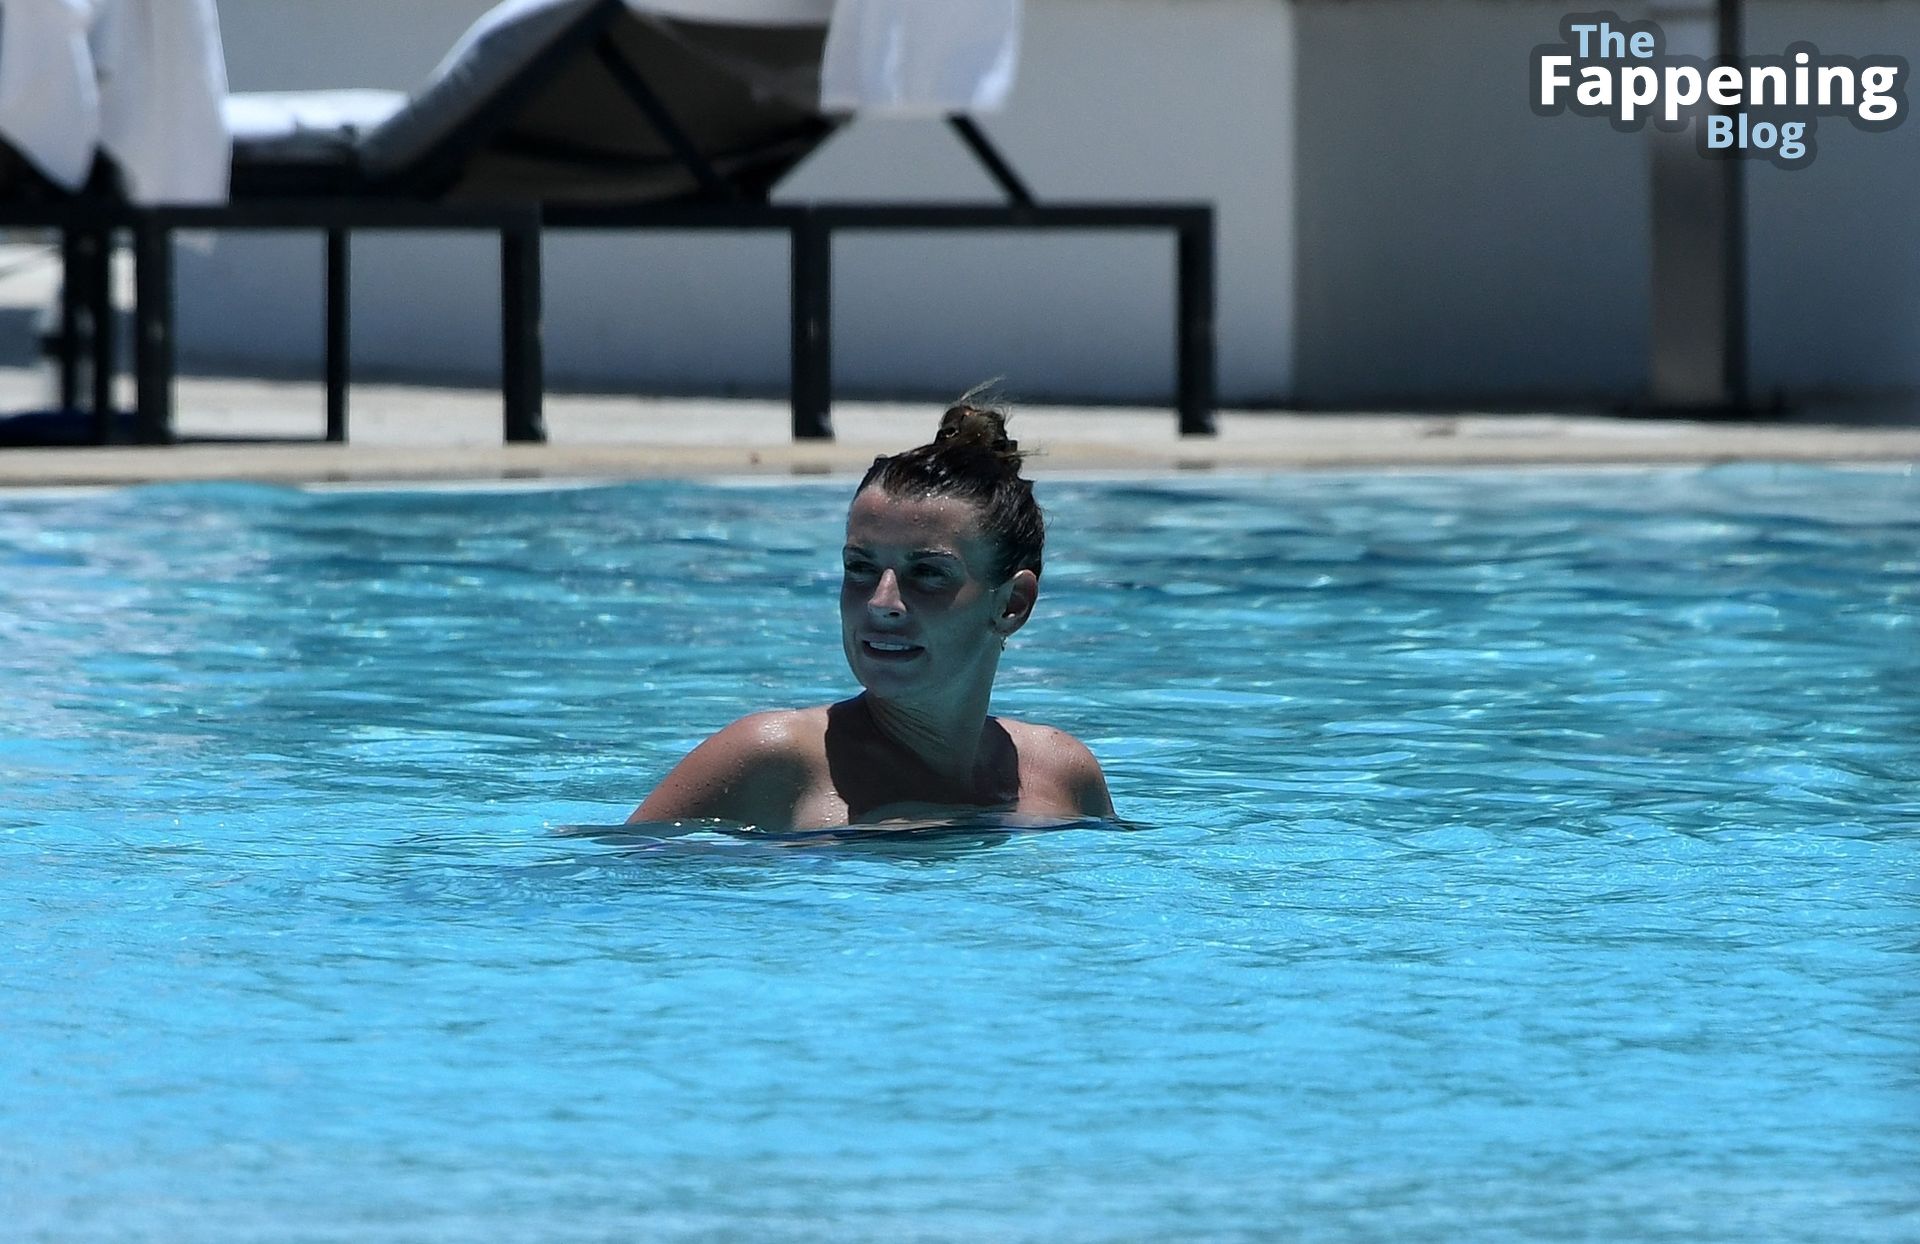 Coleen Rooney Shows Off Her Bikini Body After Enjoying a Dip in Her Hotel Pool in Ft. Lauderdale (Photos)